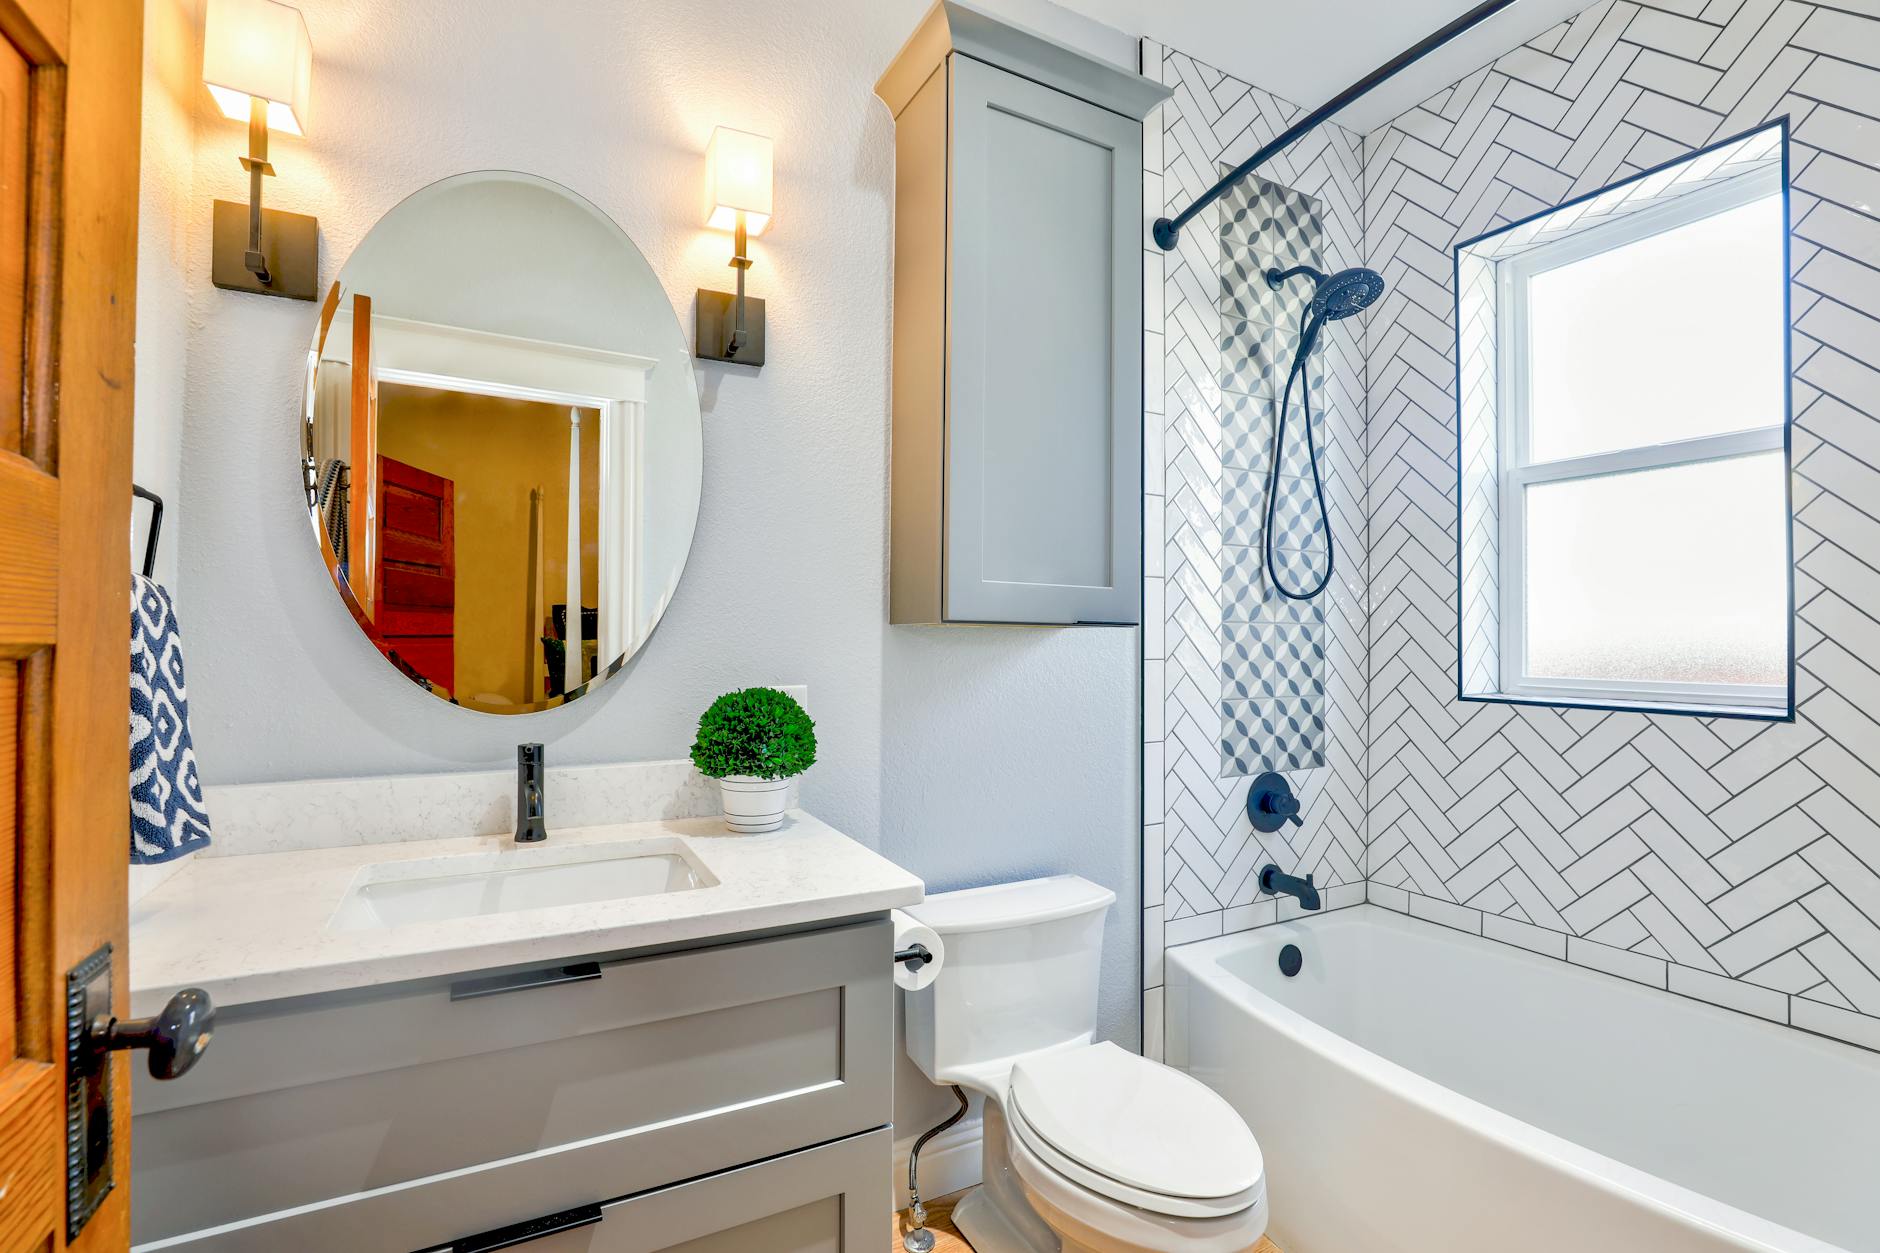 12 Questions to Ask Before Renovating a Bathroom